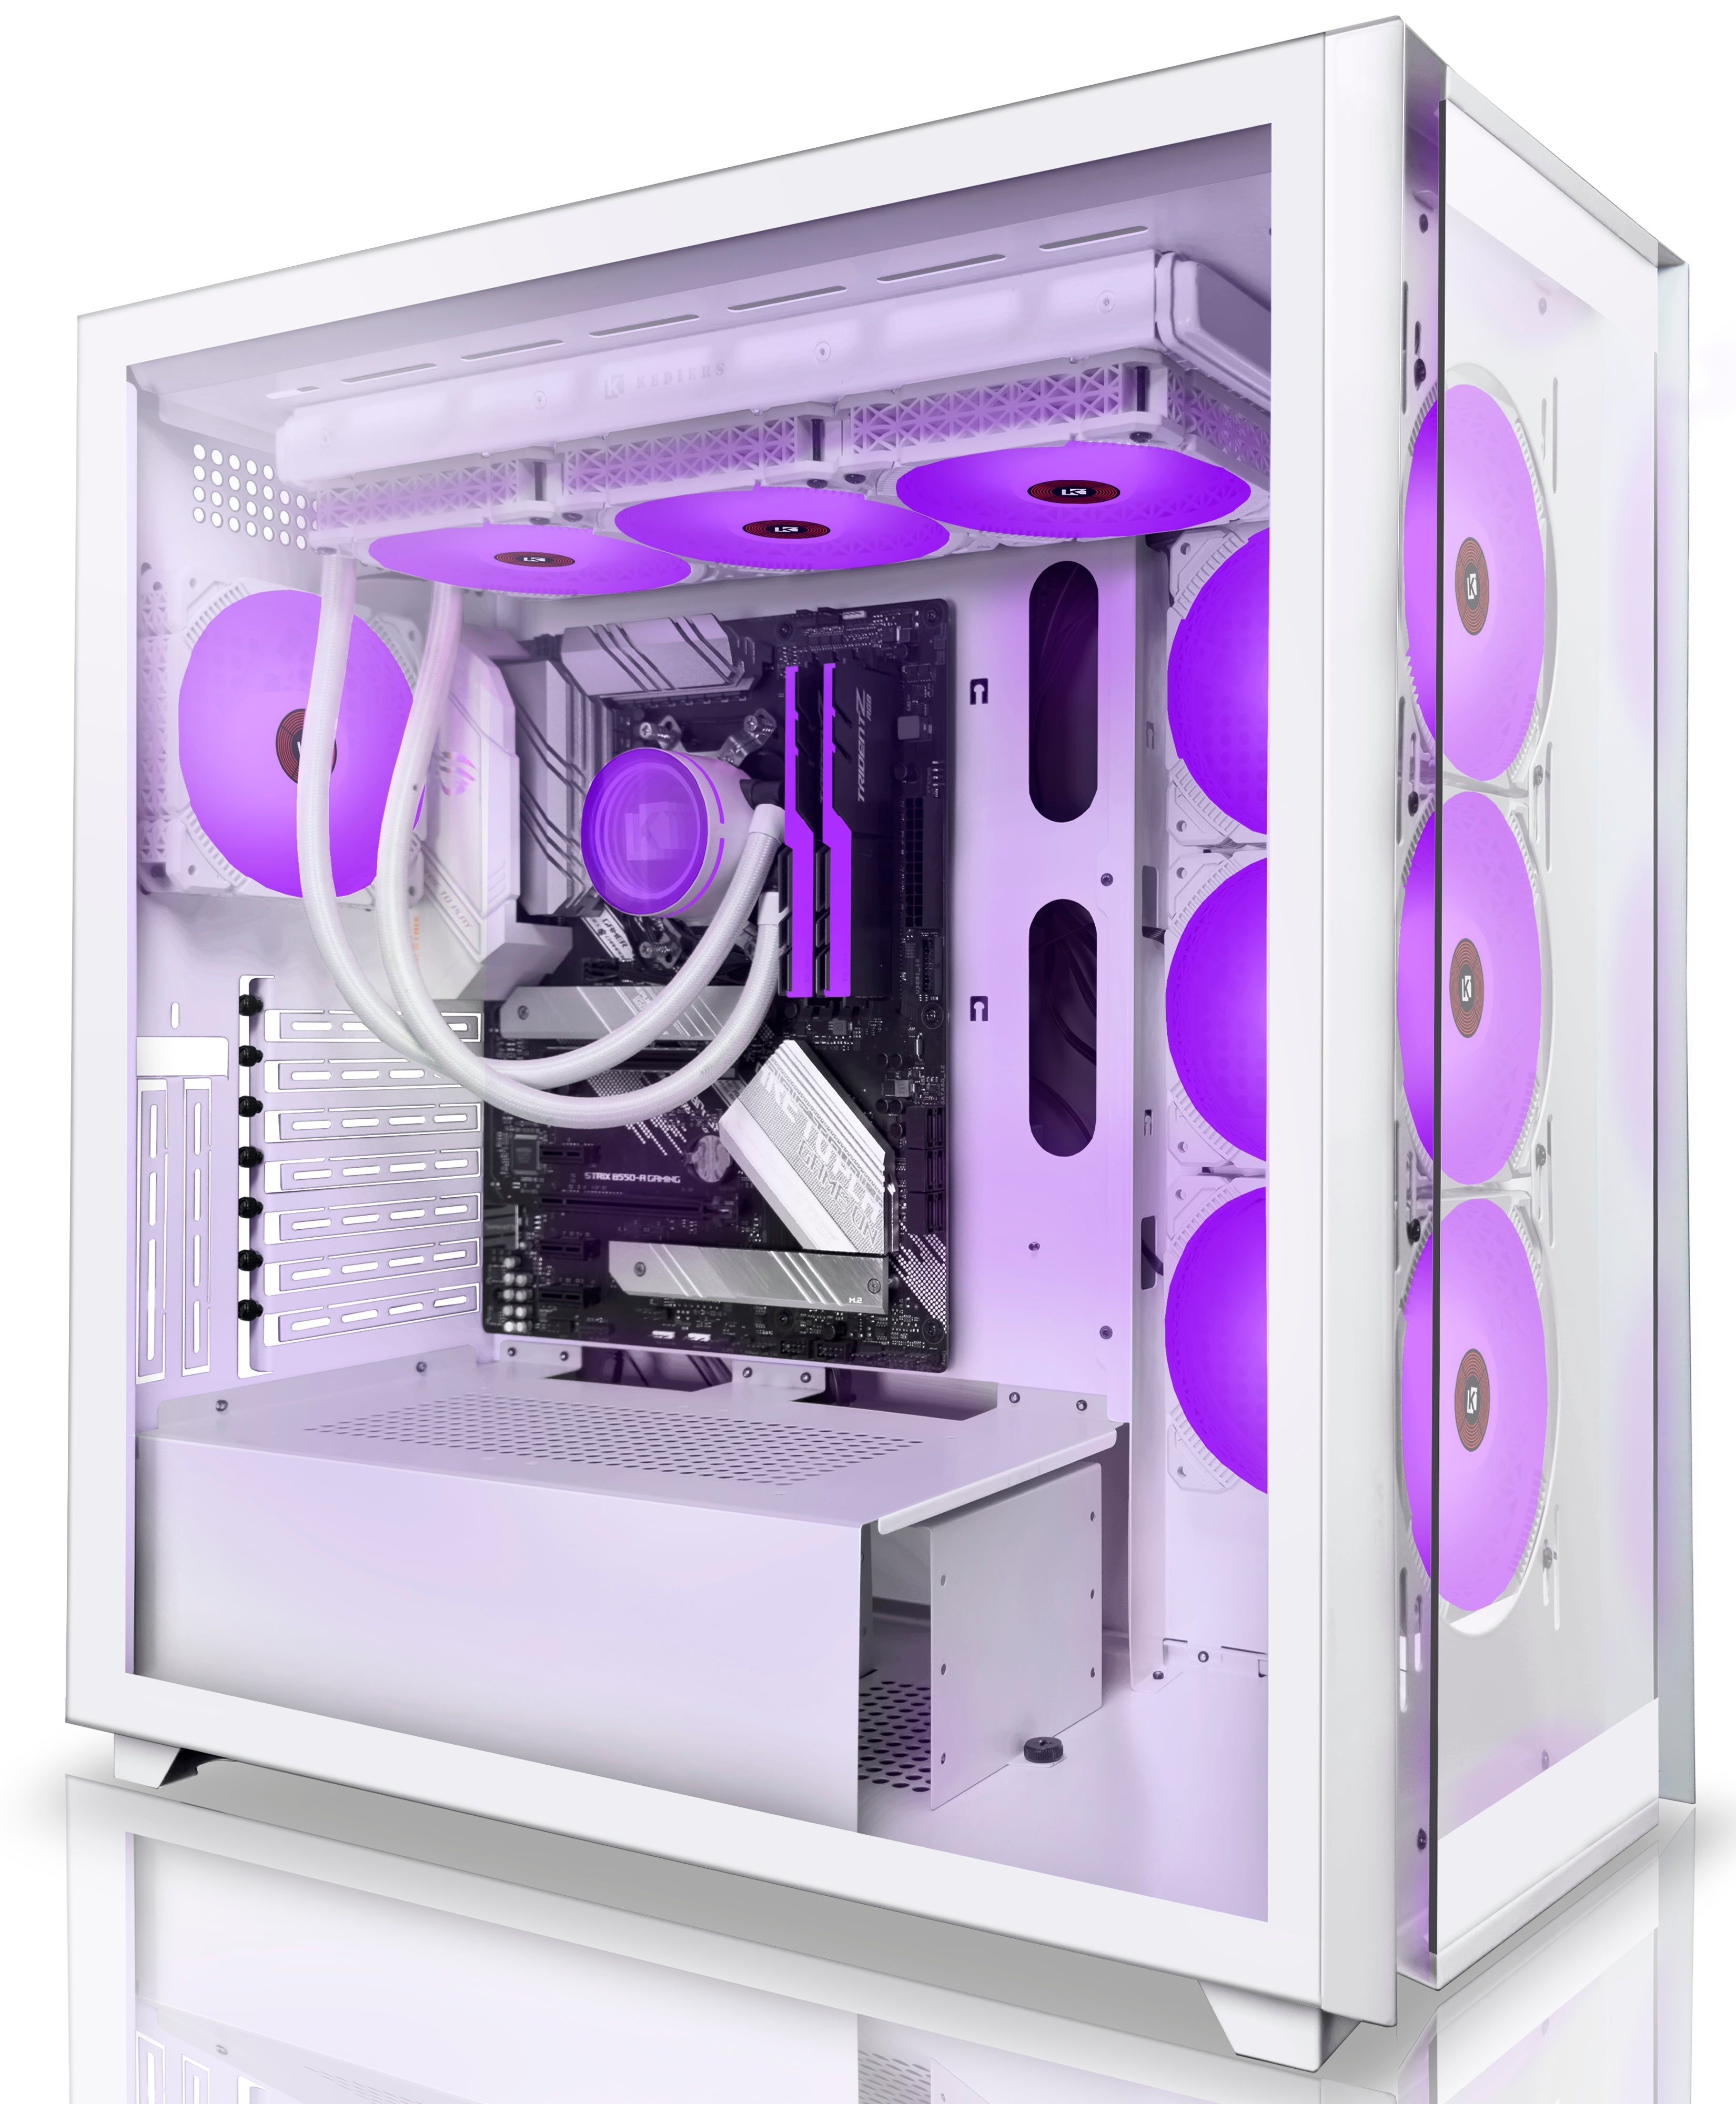 KEDIERS Mech PC Case - ATX Tower Gaming Computer Case with Tempered Glass  (C700 White + 10 ARGB Fans)